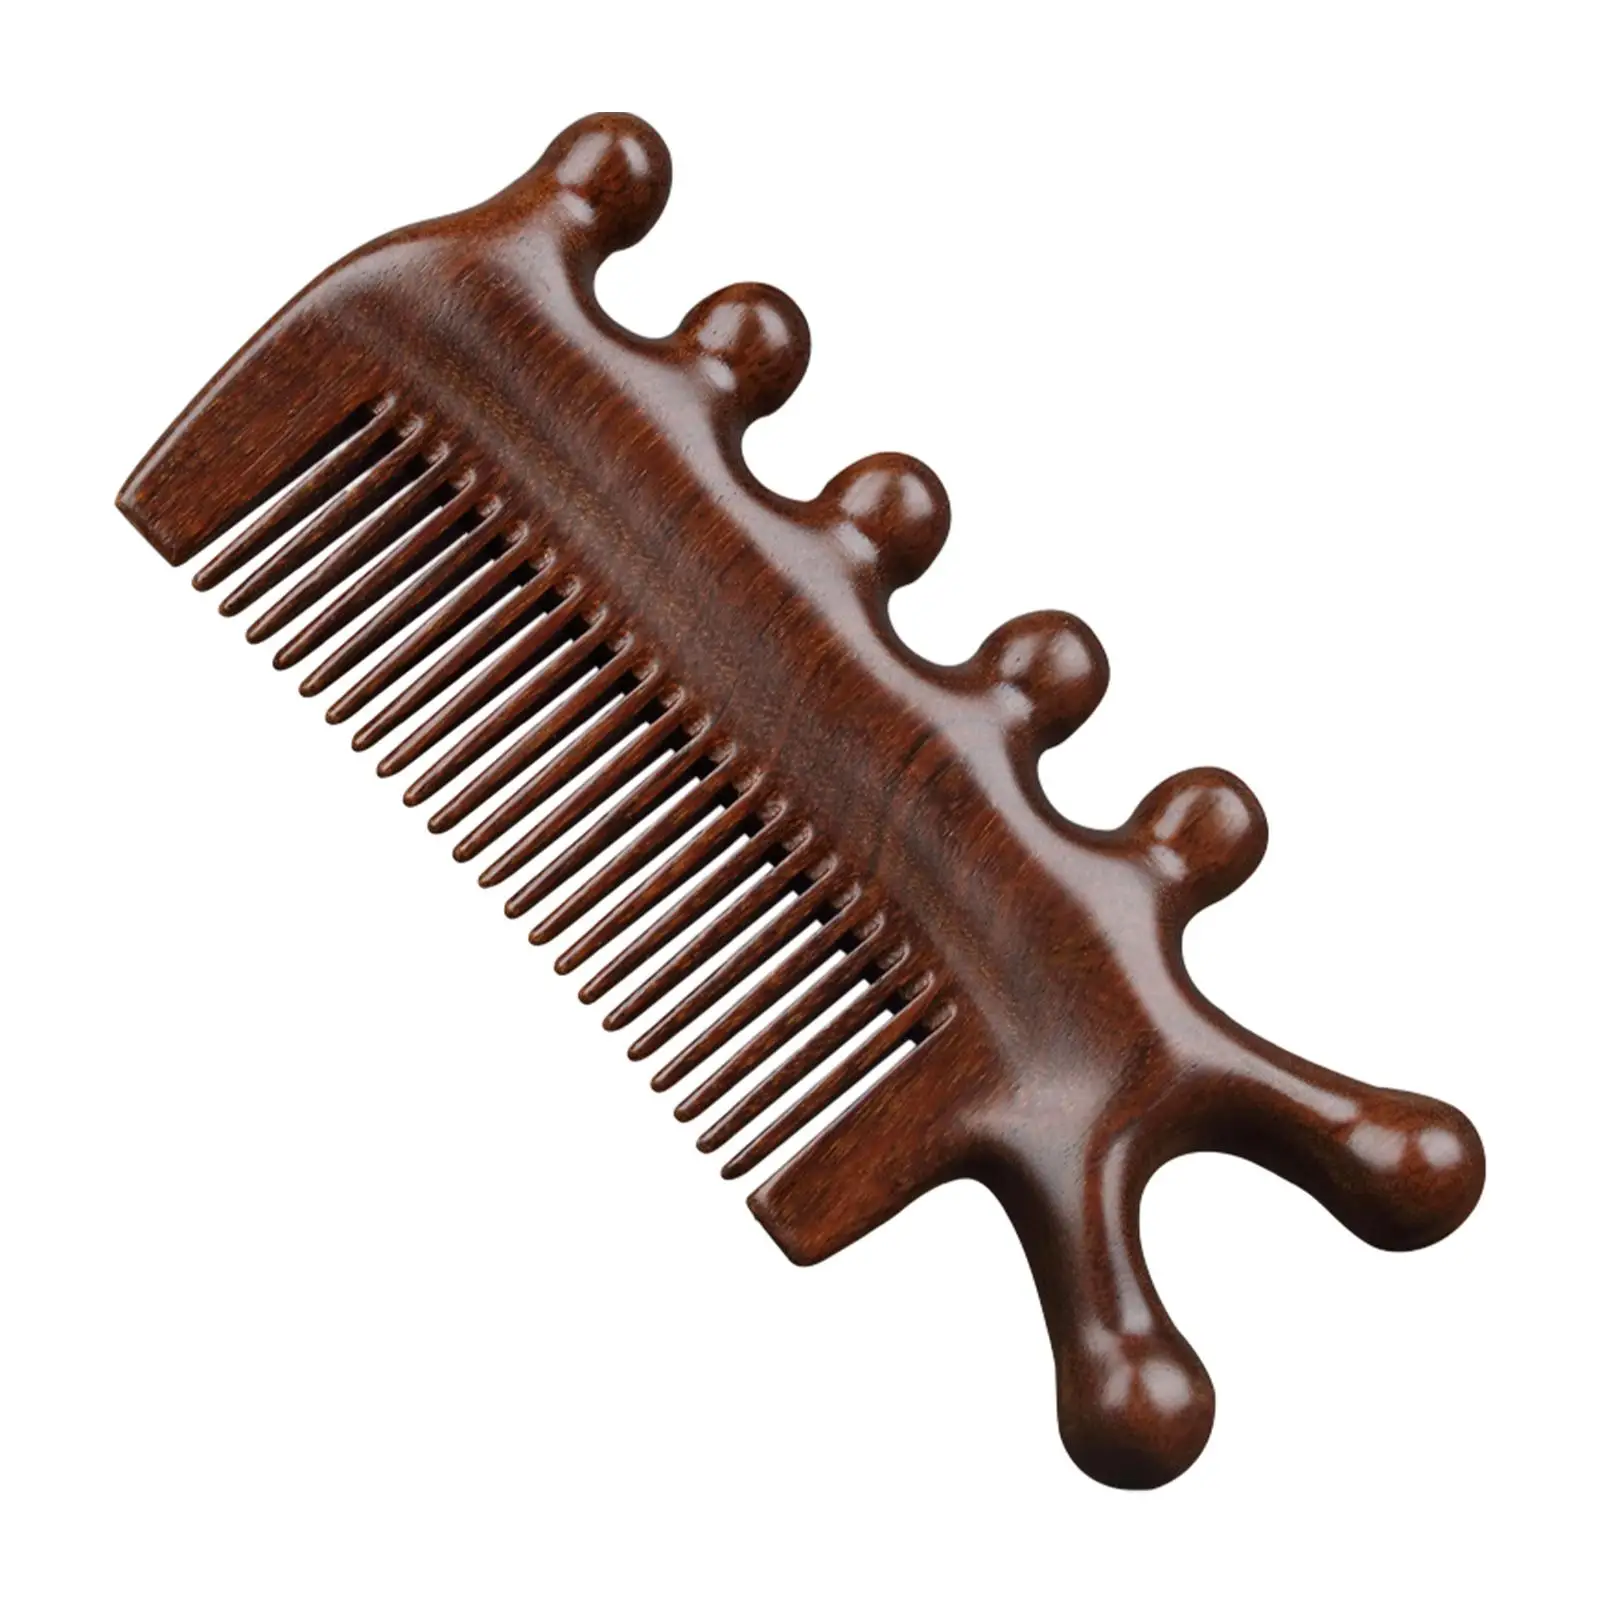 Wooden Massage Comb Handheld Hand Made Head Caring for Head Massage Tool Men